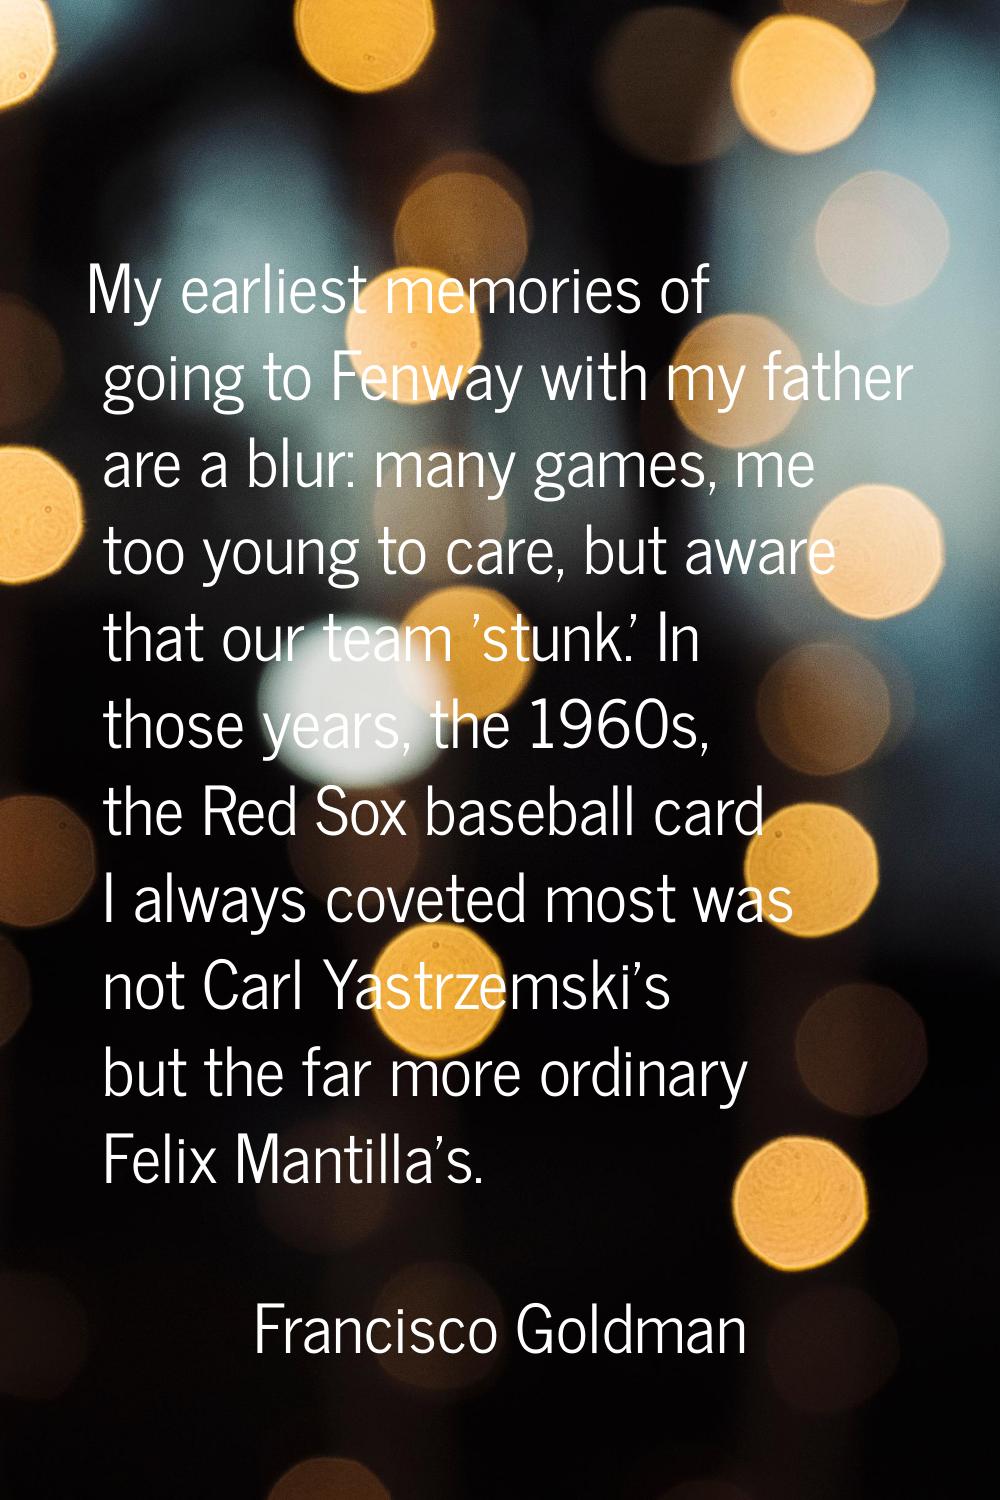 My earliest memories of going to Fenway with my father are a blur: many games, me too young to care